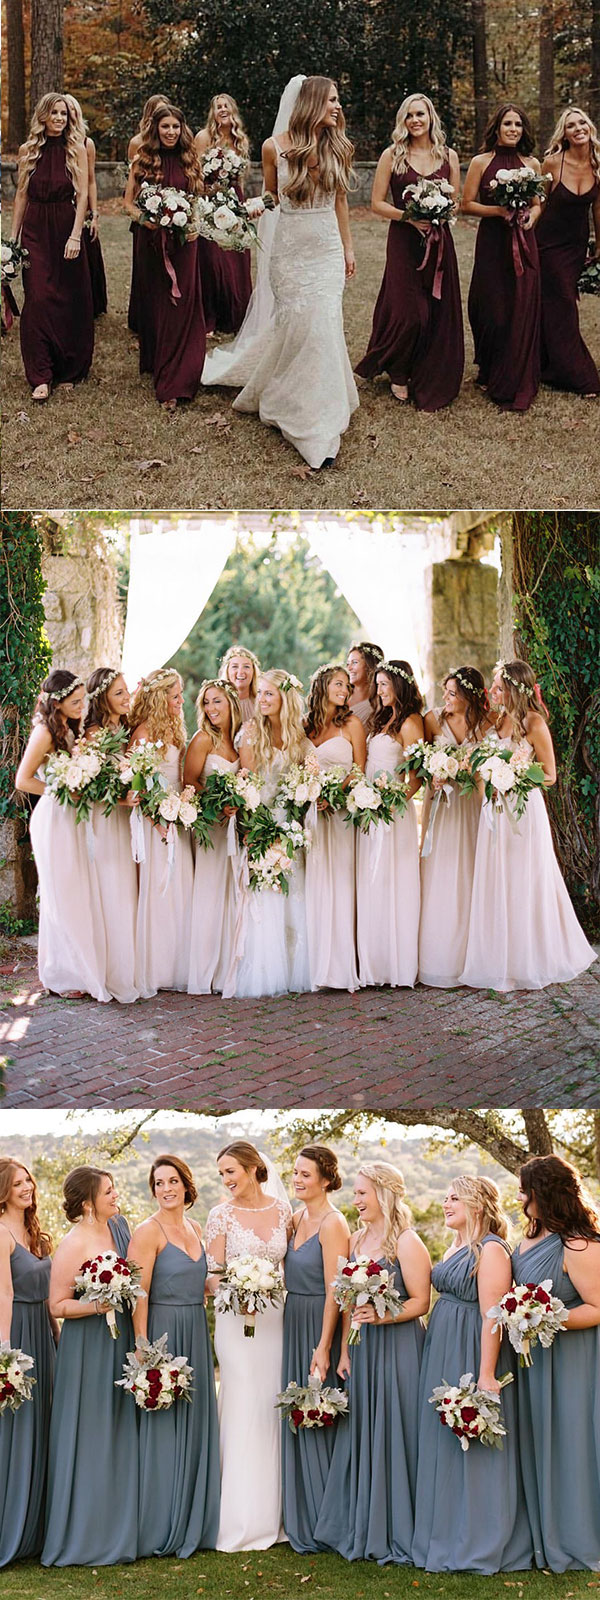 Mix and Match Bridesmaid Dresses Done Right: 7 Ways to Rock the Trend ...